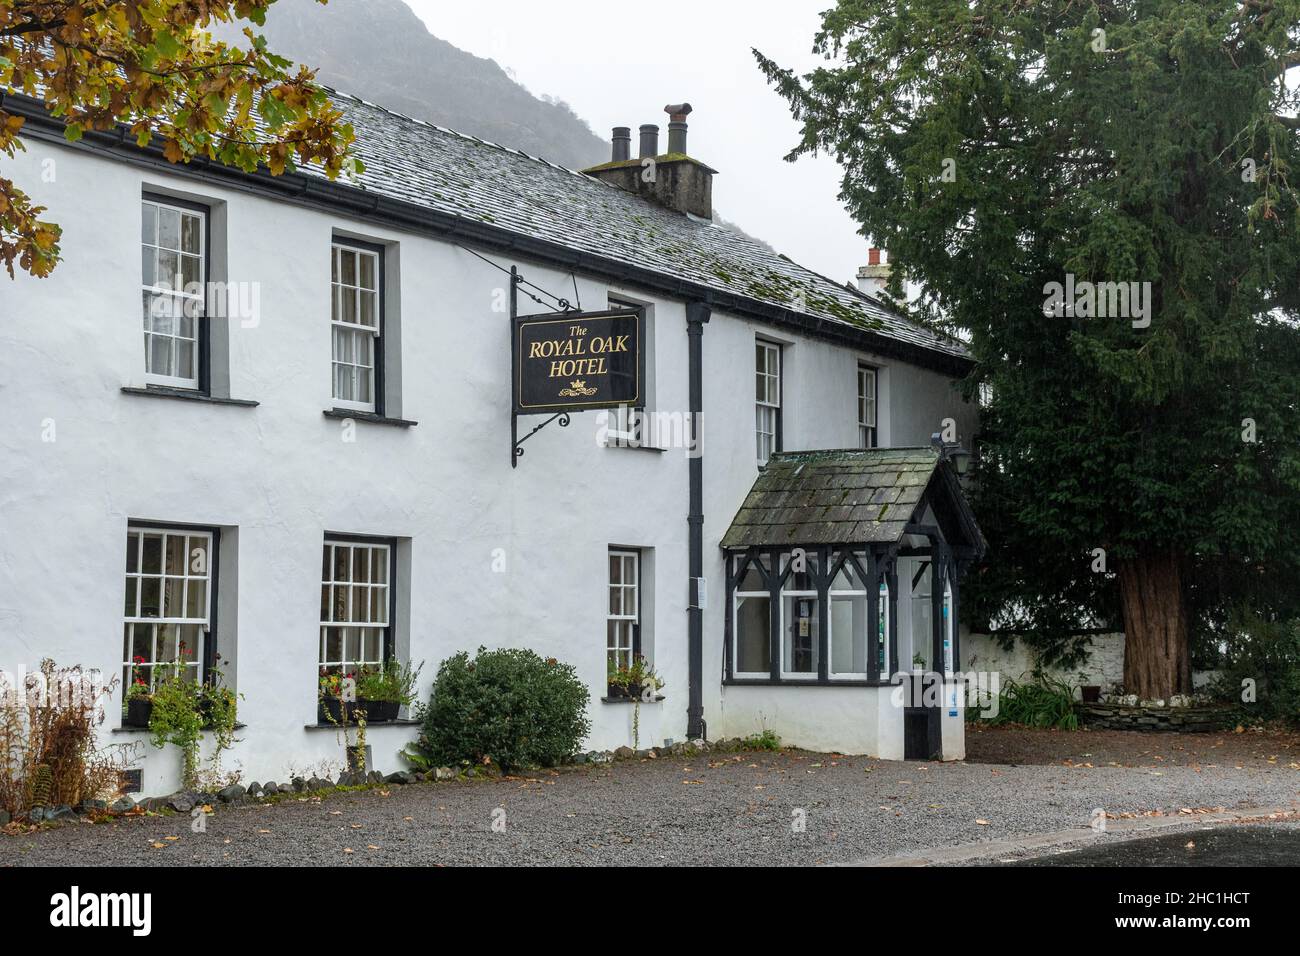 The Royal Oak Hotel and pub in Rosthwaite village, Borrowdale, Lake District National Park, Cumbria, Angleterre, Royaume-Uni Banque D'Images